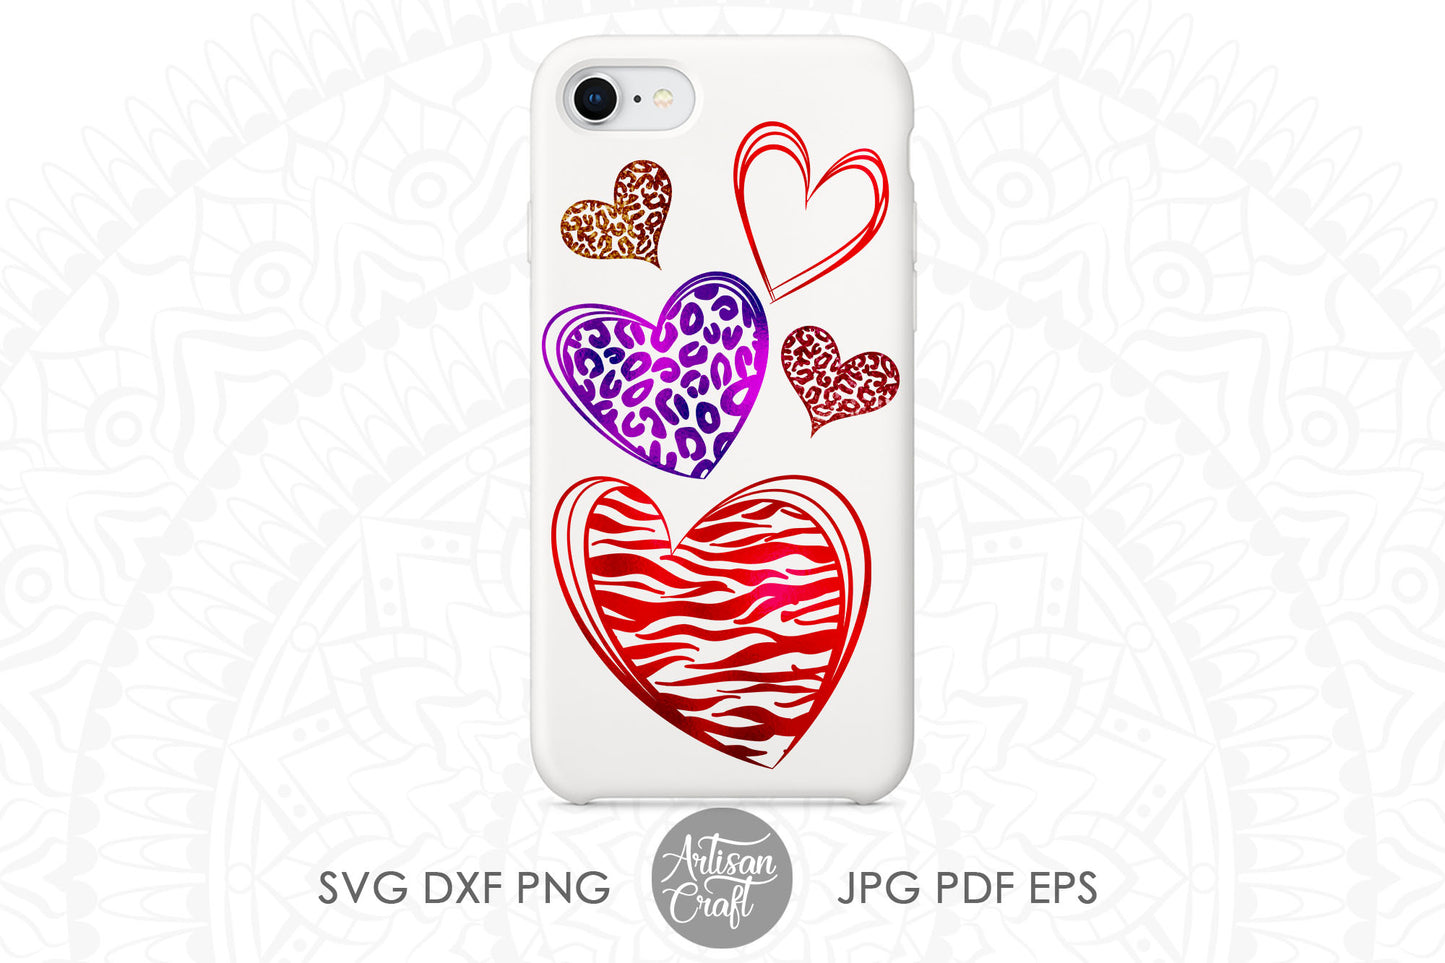 Leopard and animal print hearts SVG